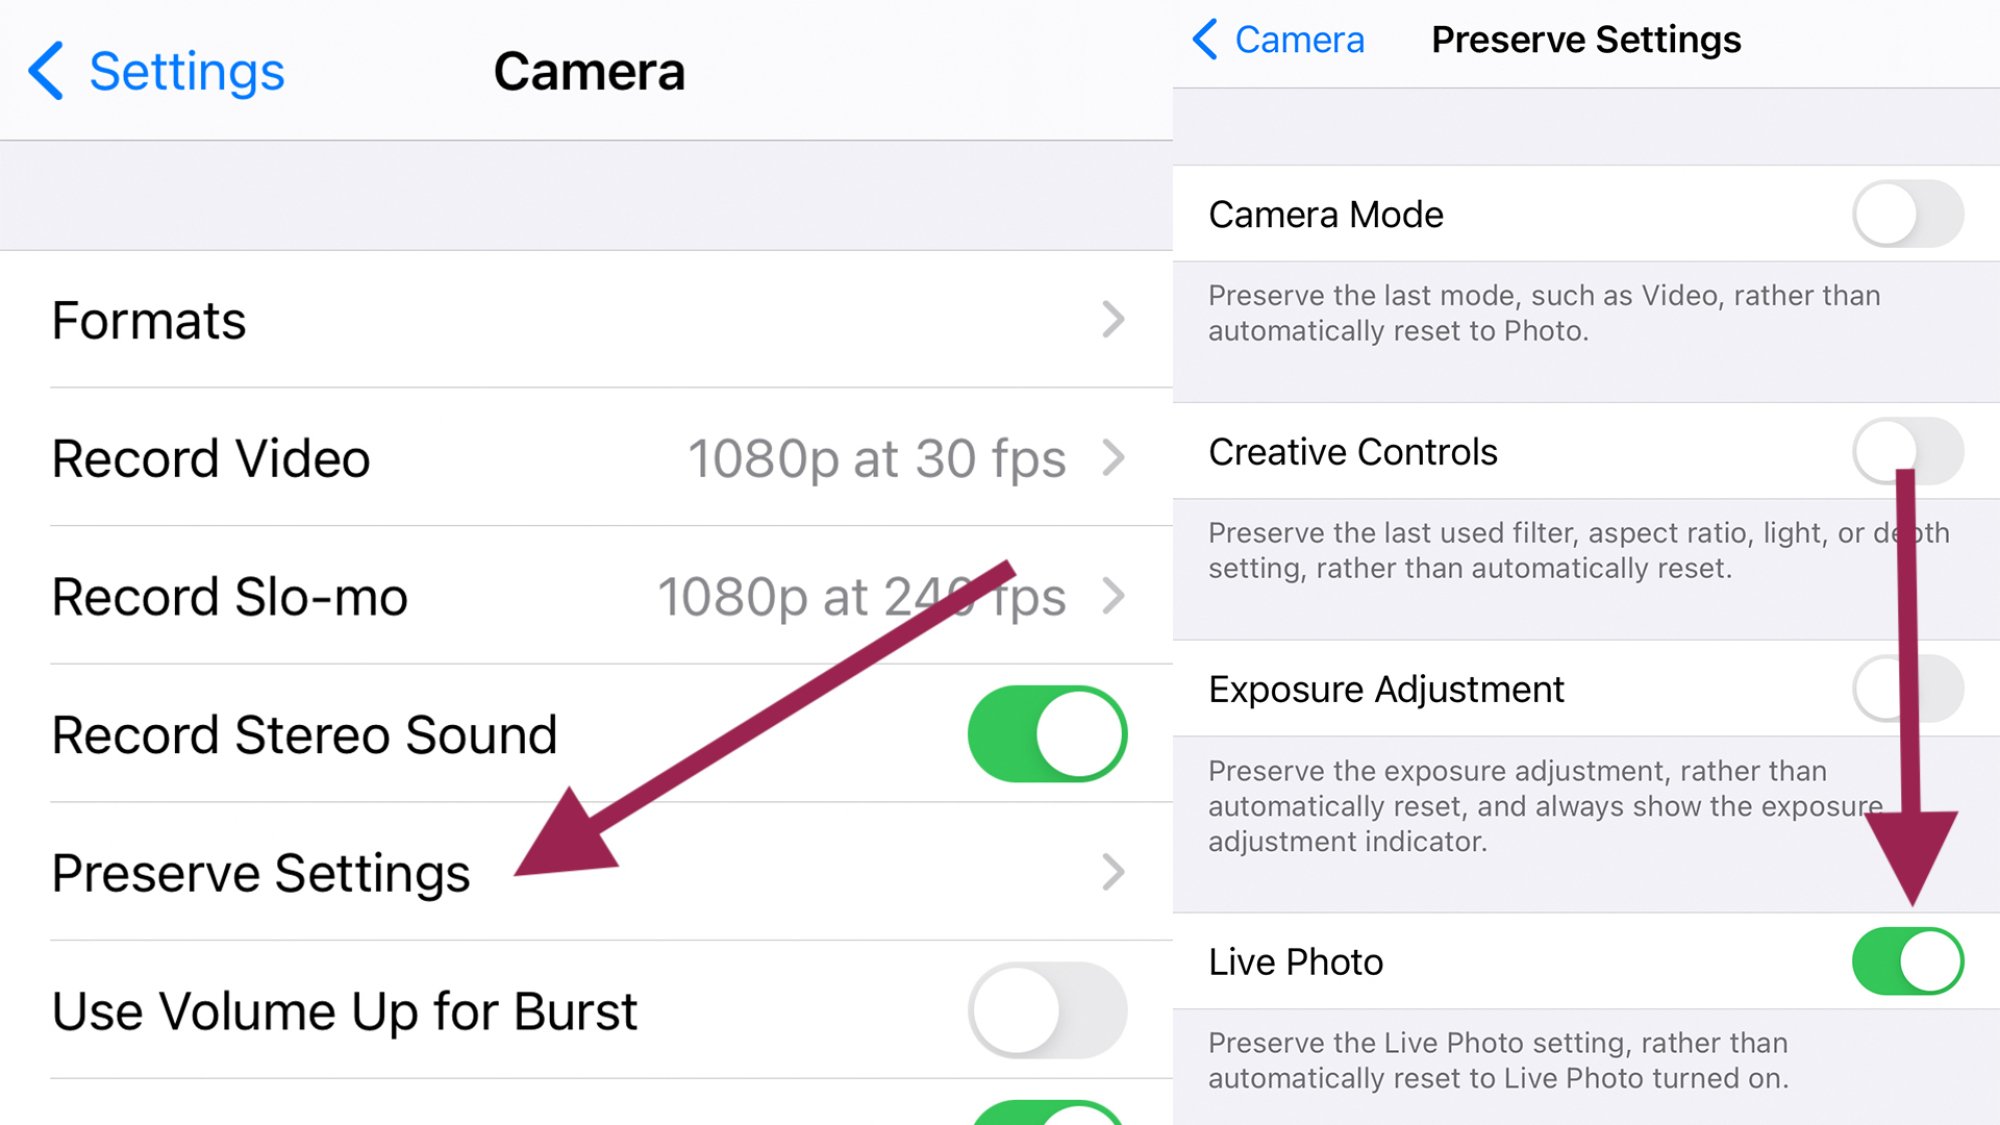 Composite of iPhone screenshots showing the "Preserve Settings" menu and "Live Photo" toggle. 